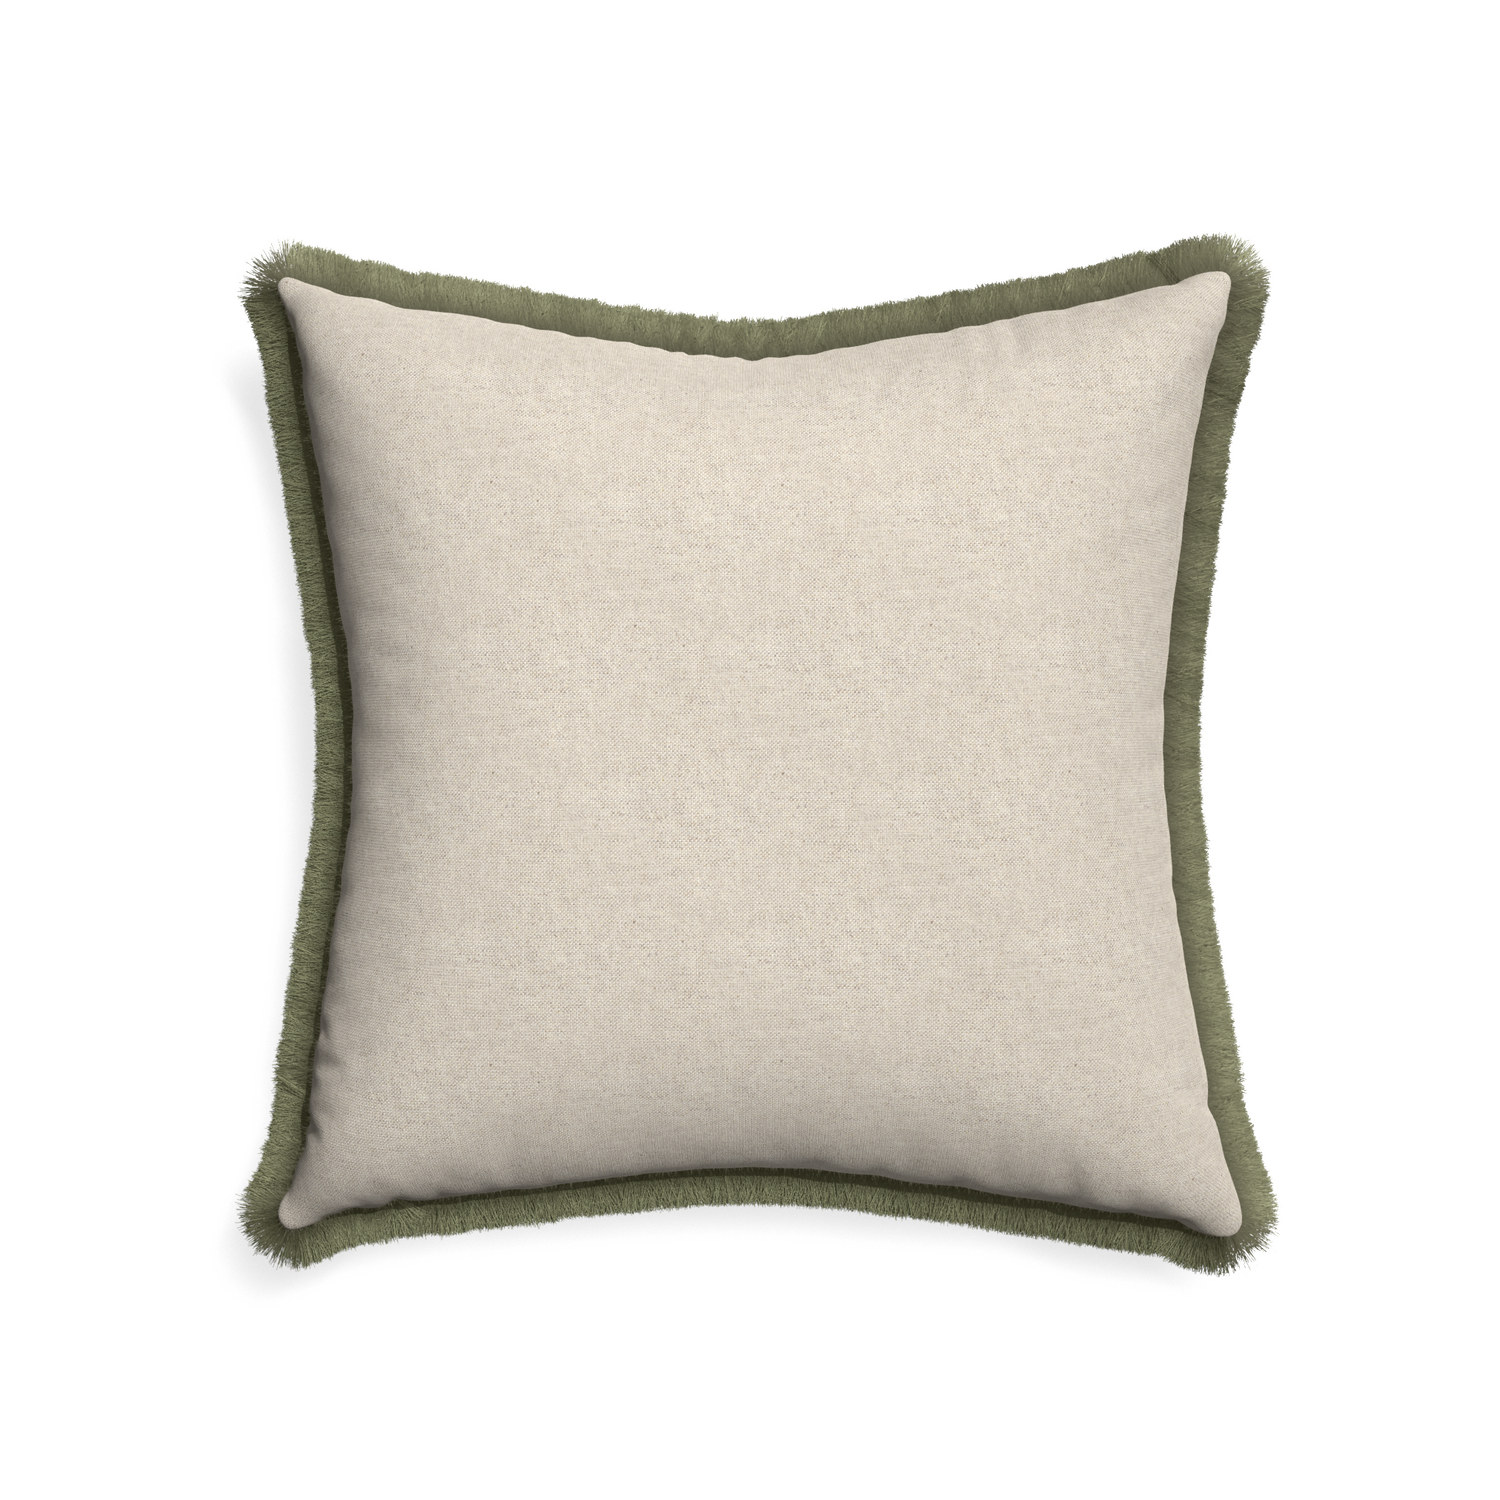 22-square oat custom pillow with sage fringe on white background